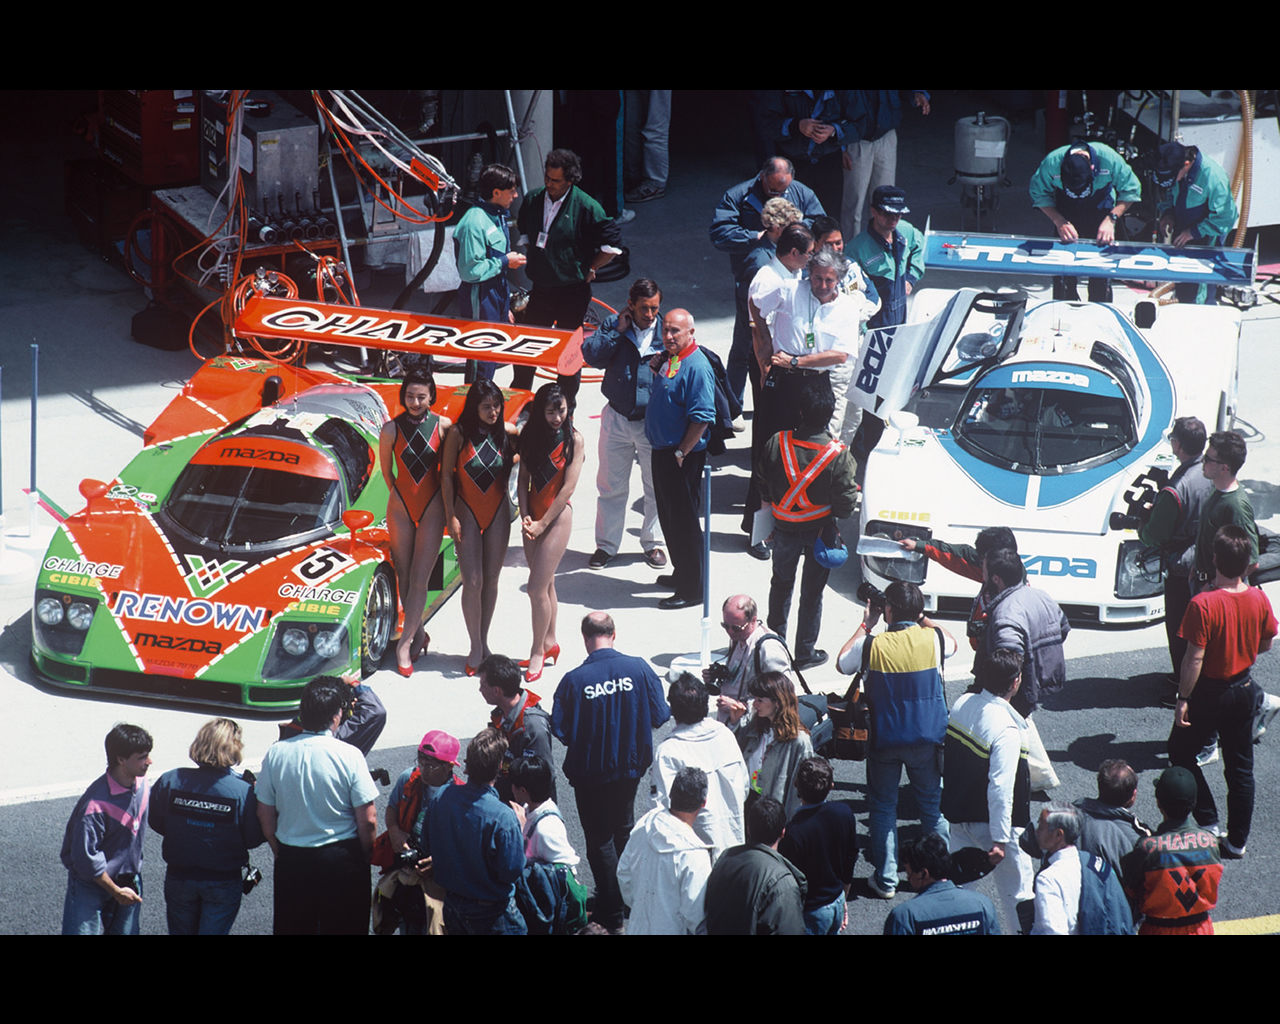 MAZDA 787B 1991 Le Mans winner with Rotary Piston Engine